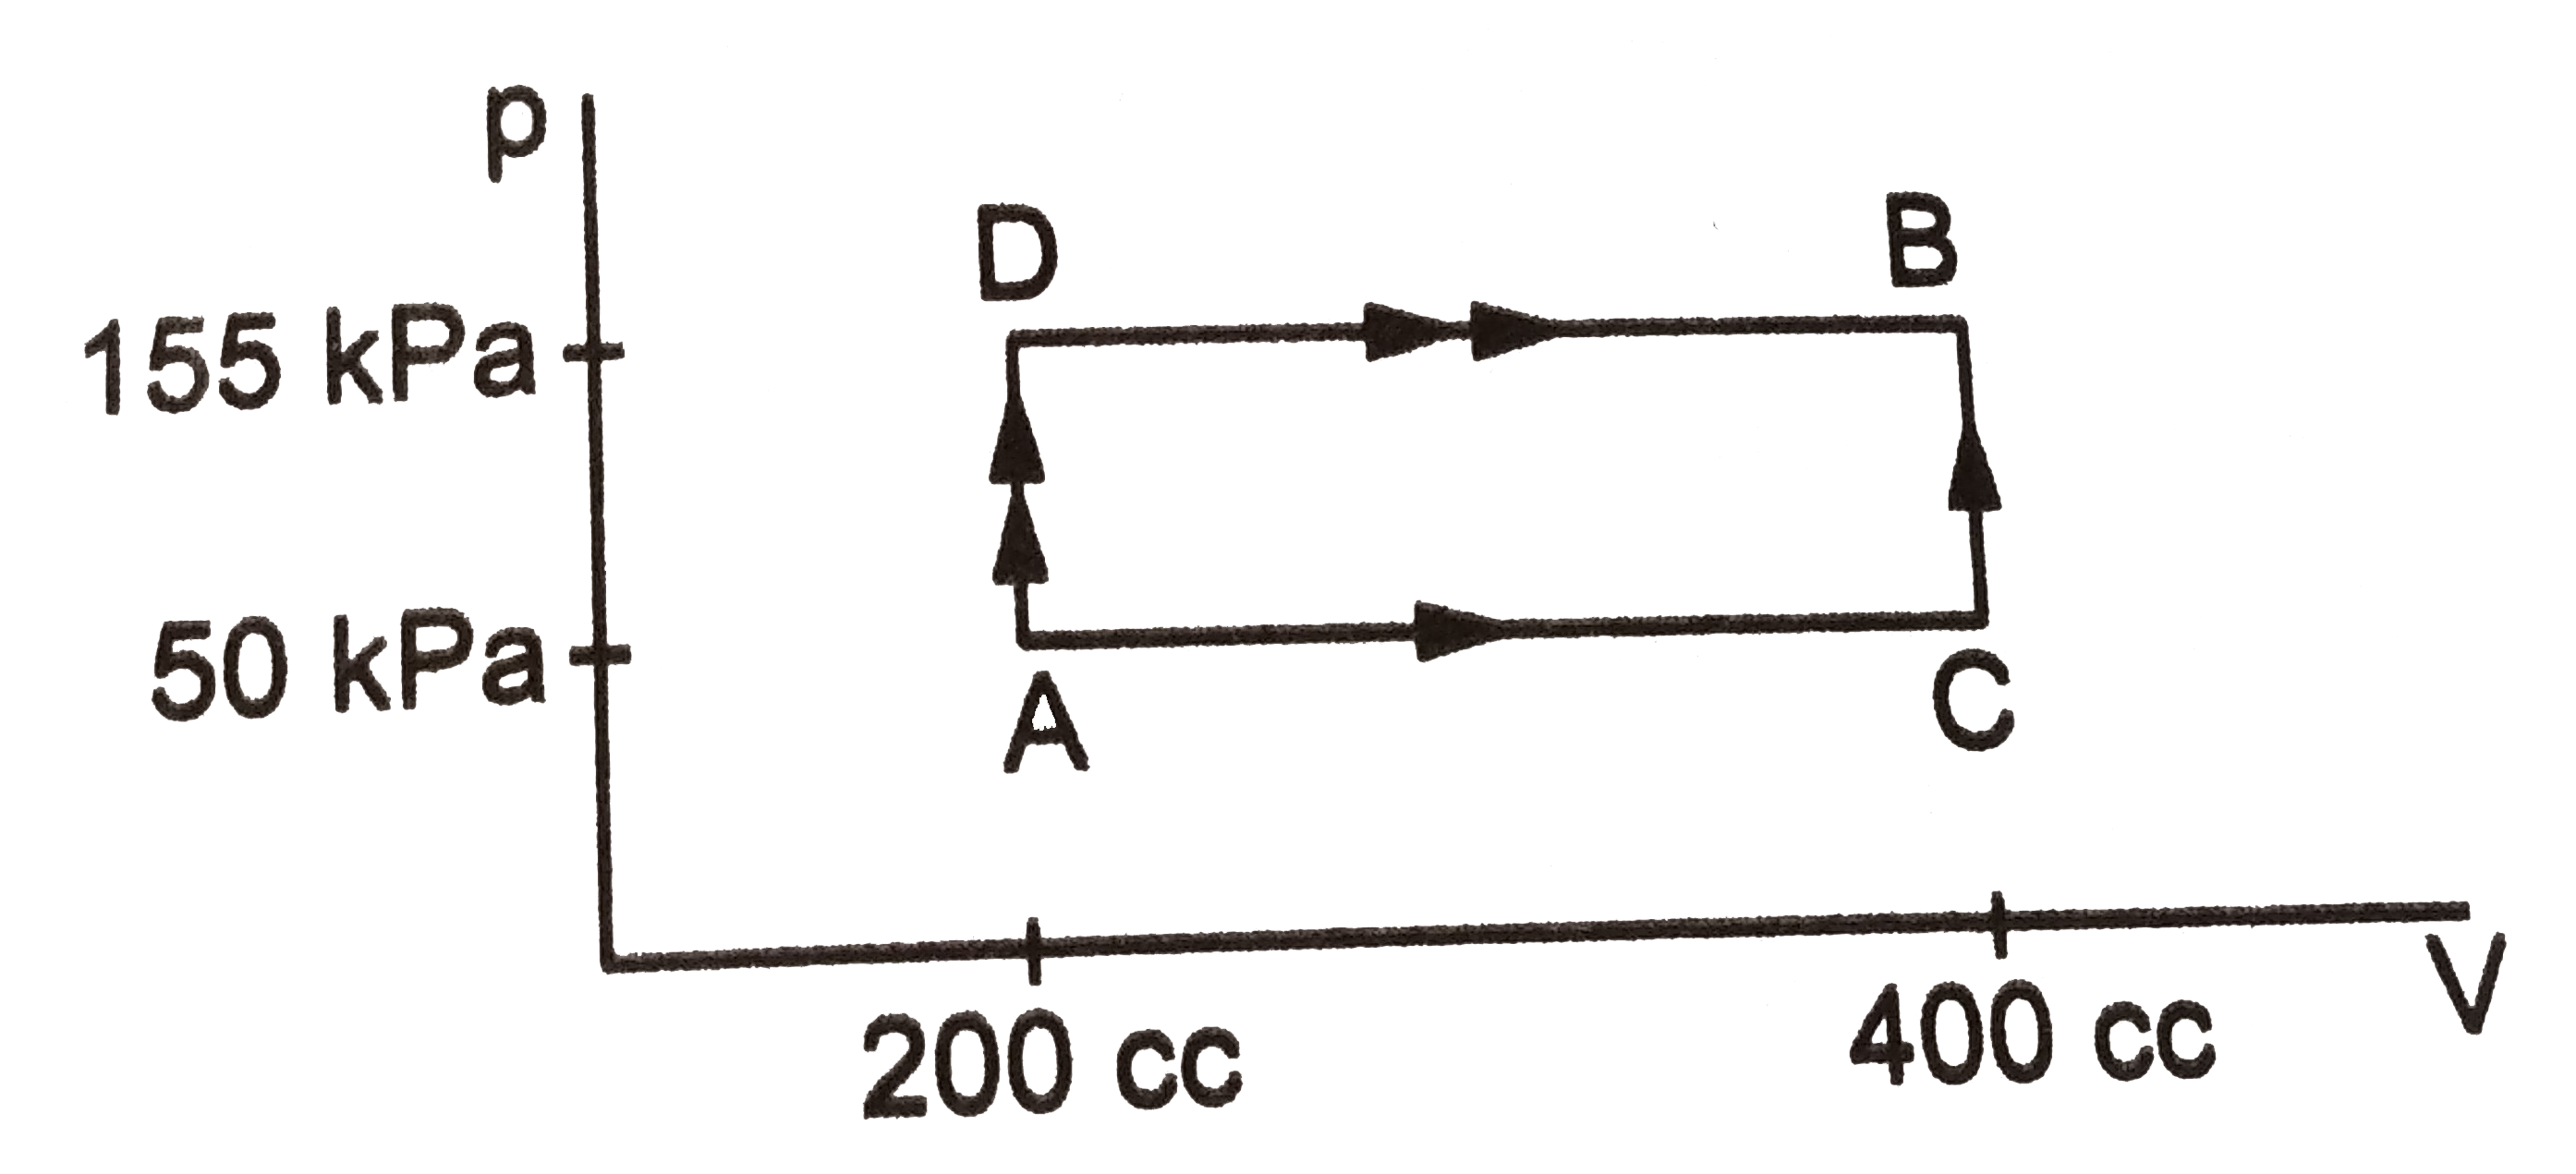 50 cal of heat should be supplied to take a system from the state  A to the state  B through the path ABC as shown in fig, Find the quantity of heat to be supplied to take it from A to B via ADB.